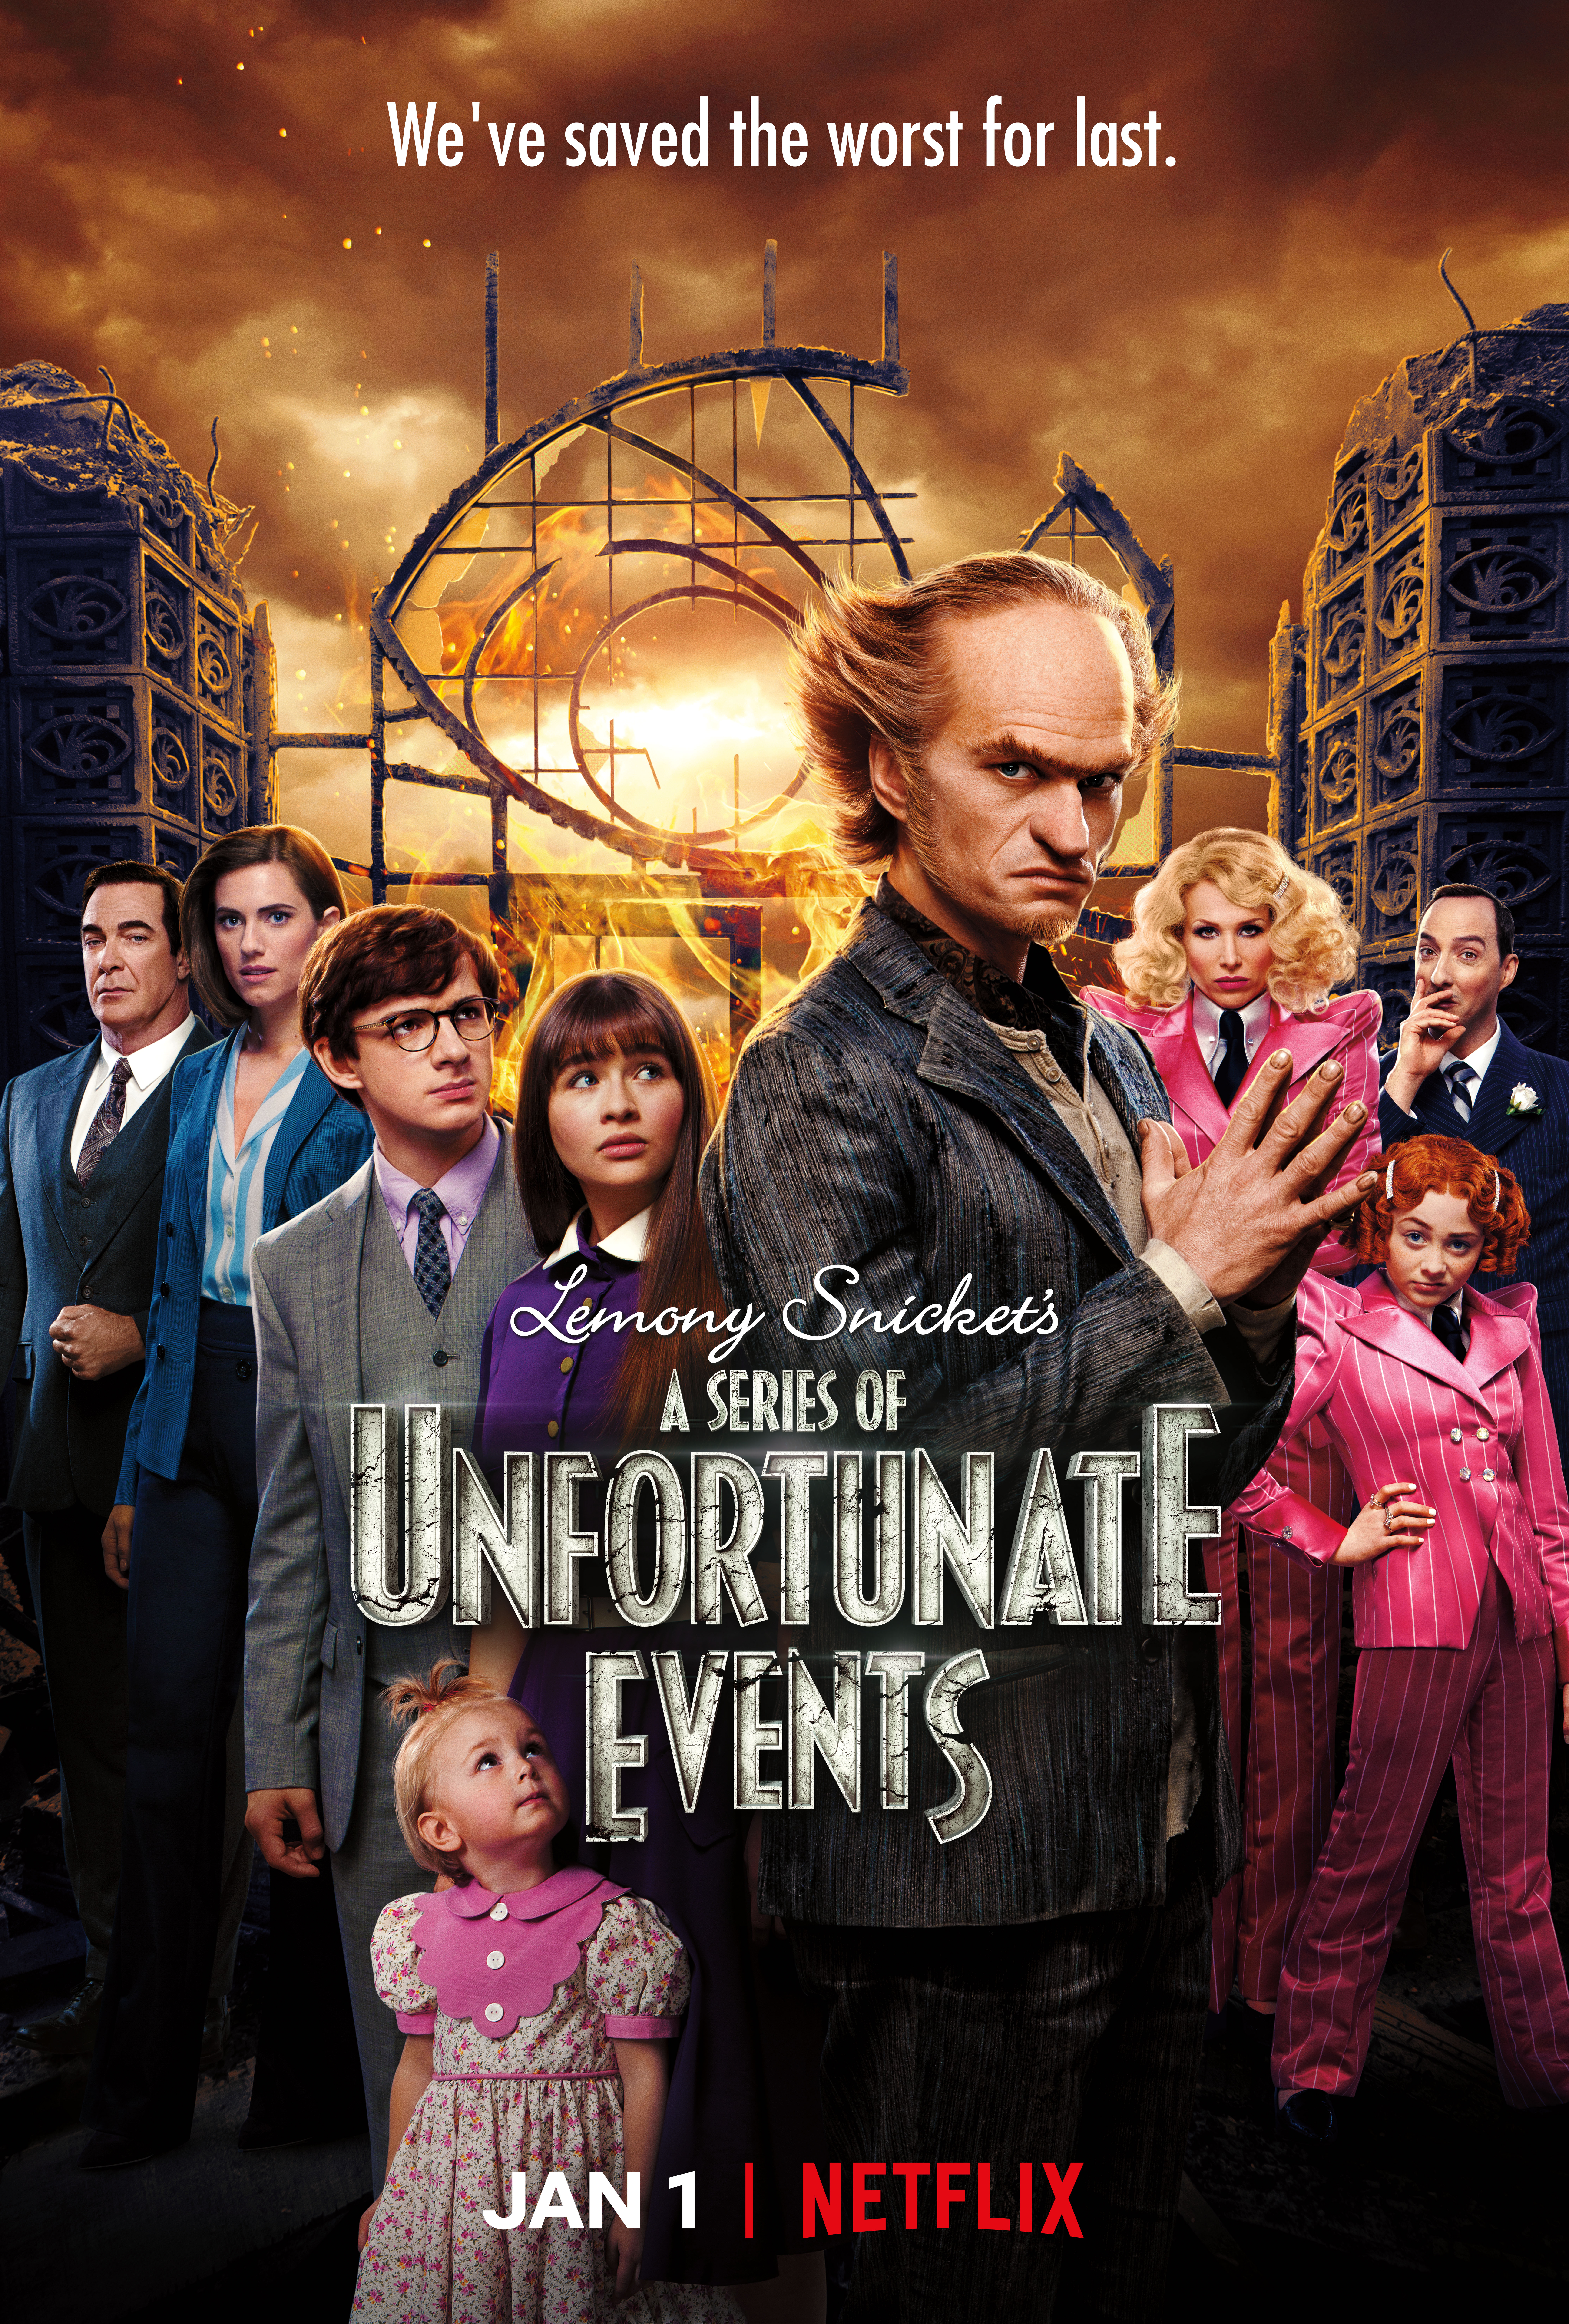 A Series of Unfortunate Events returns for its final [most dreadful] season